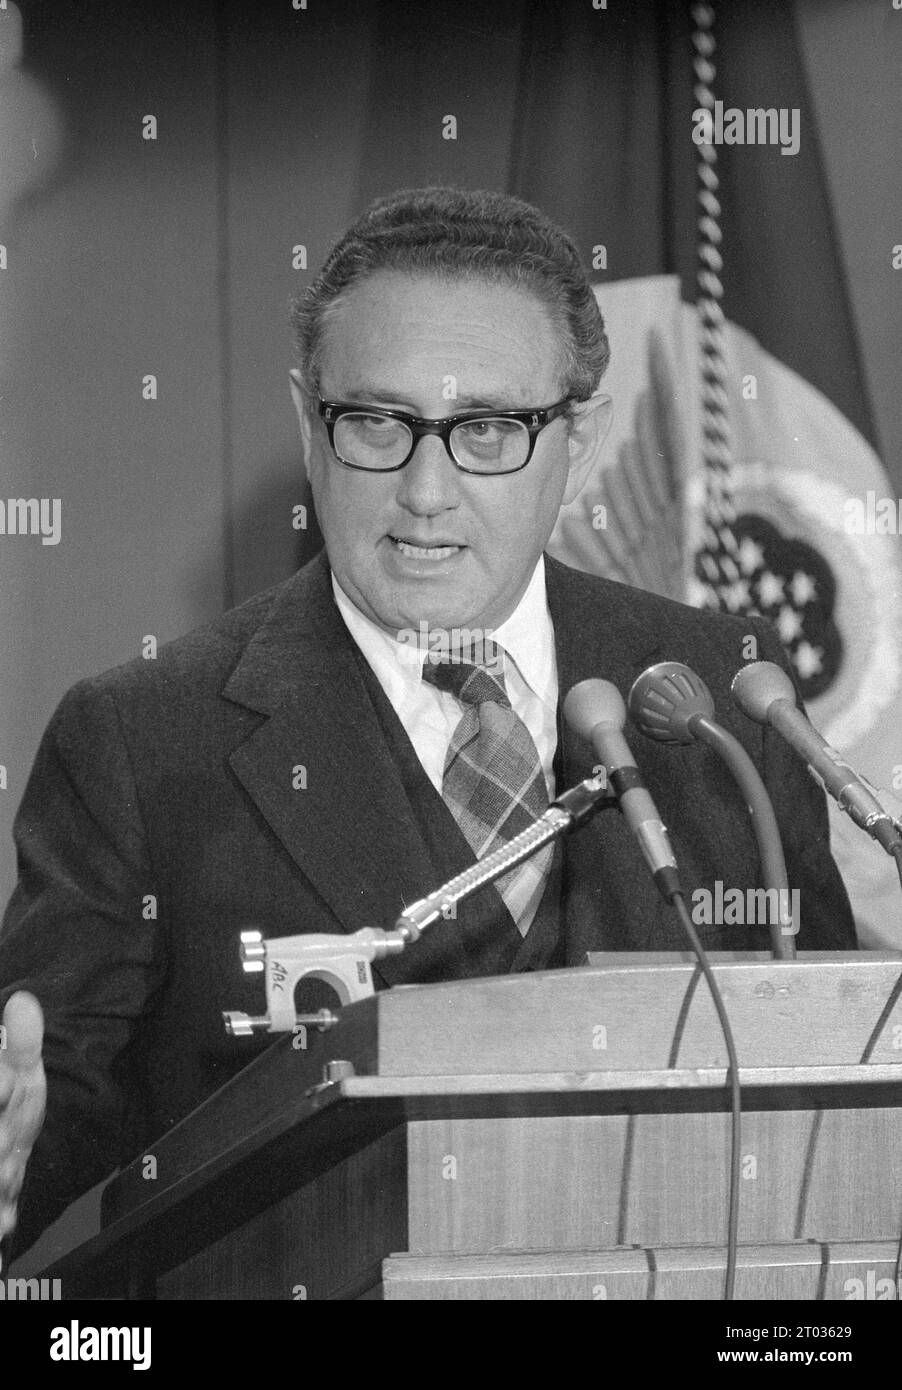 Secretary of State, Henry Kissinger, speaking at a press conference in 1975, USA Stock Photo